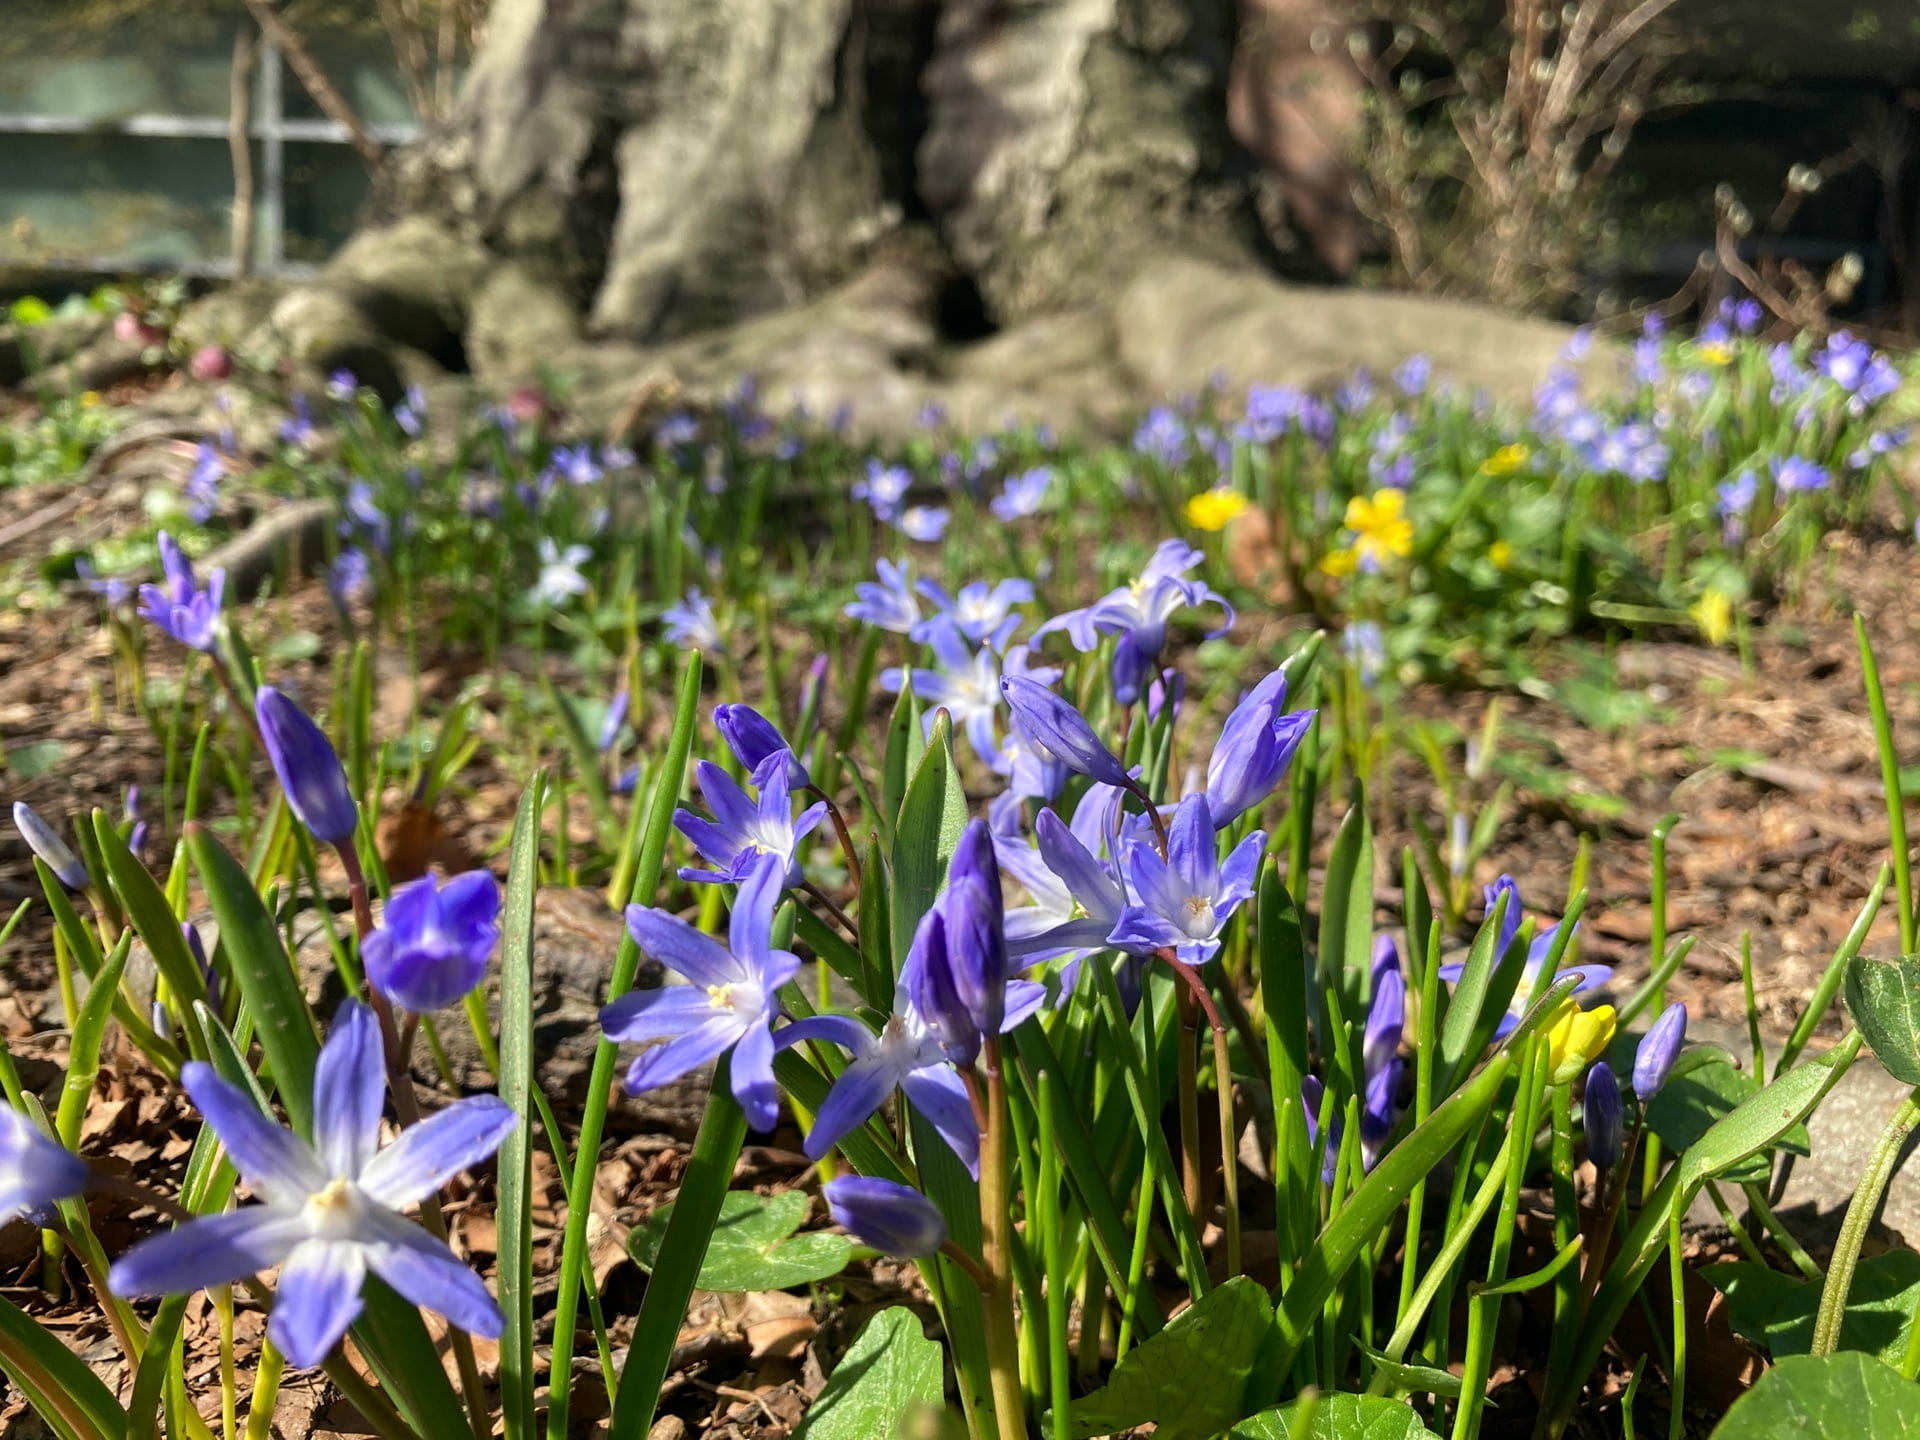 Chionodoxa forbesii blooms amongst the roots of Fagus gandifolia.